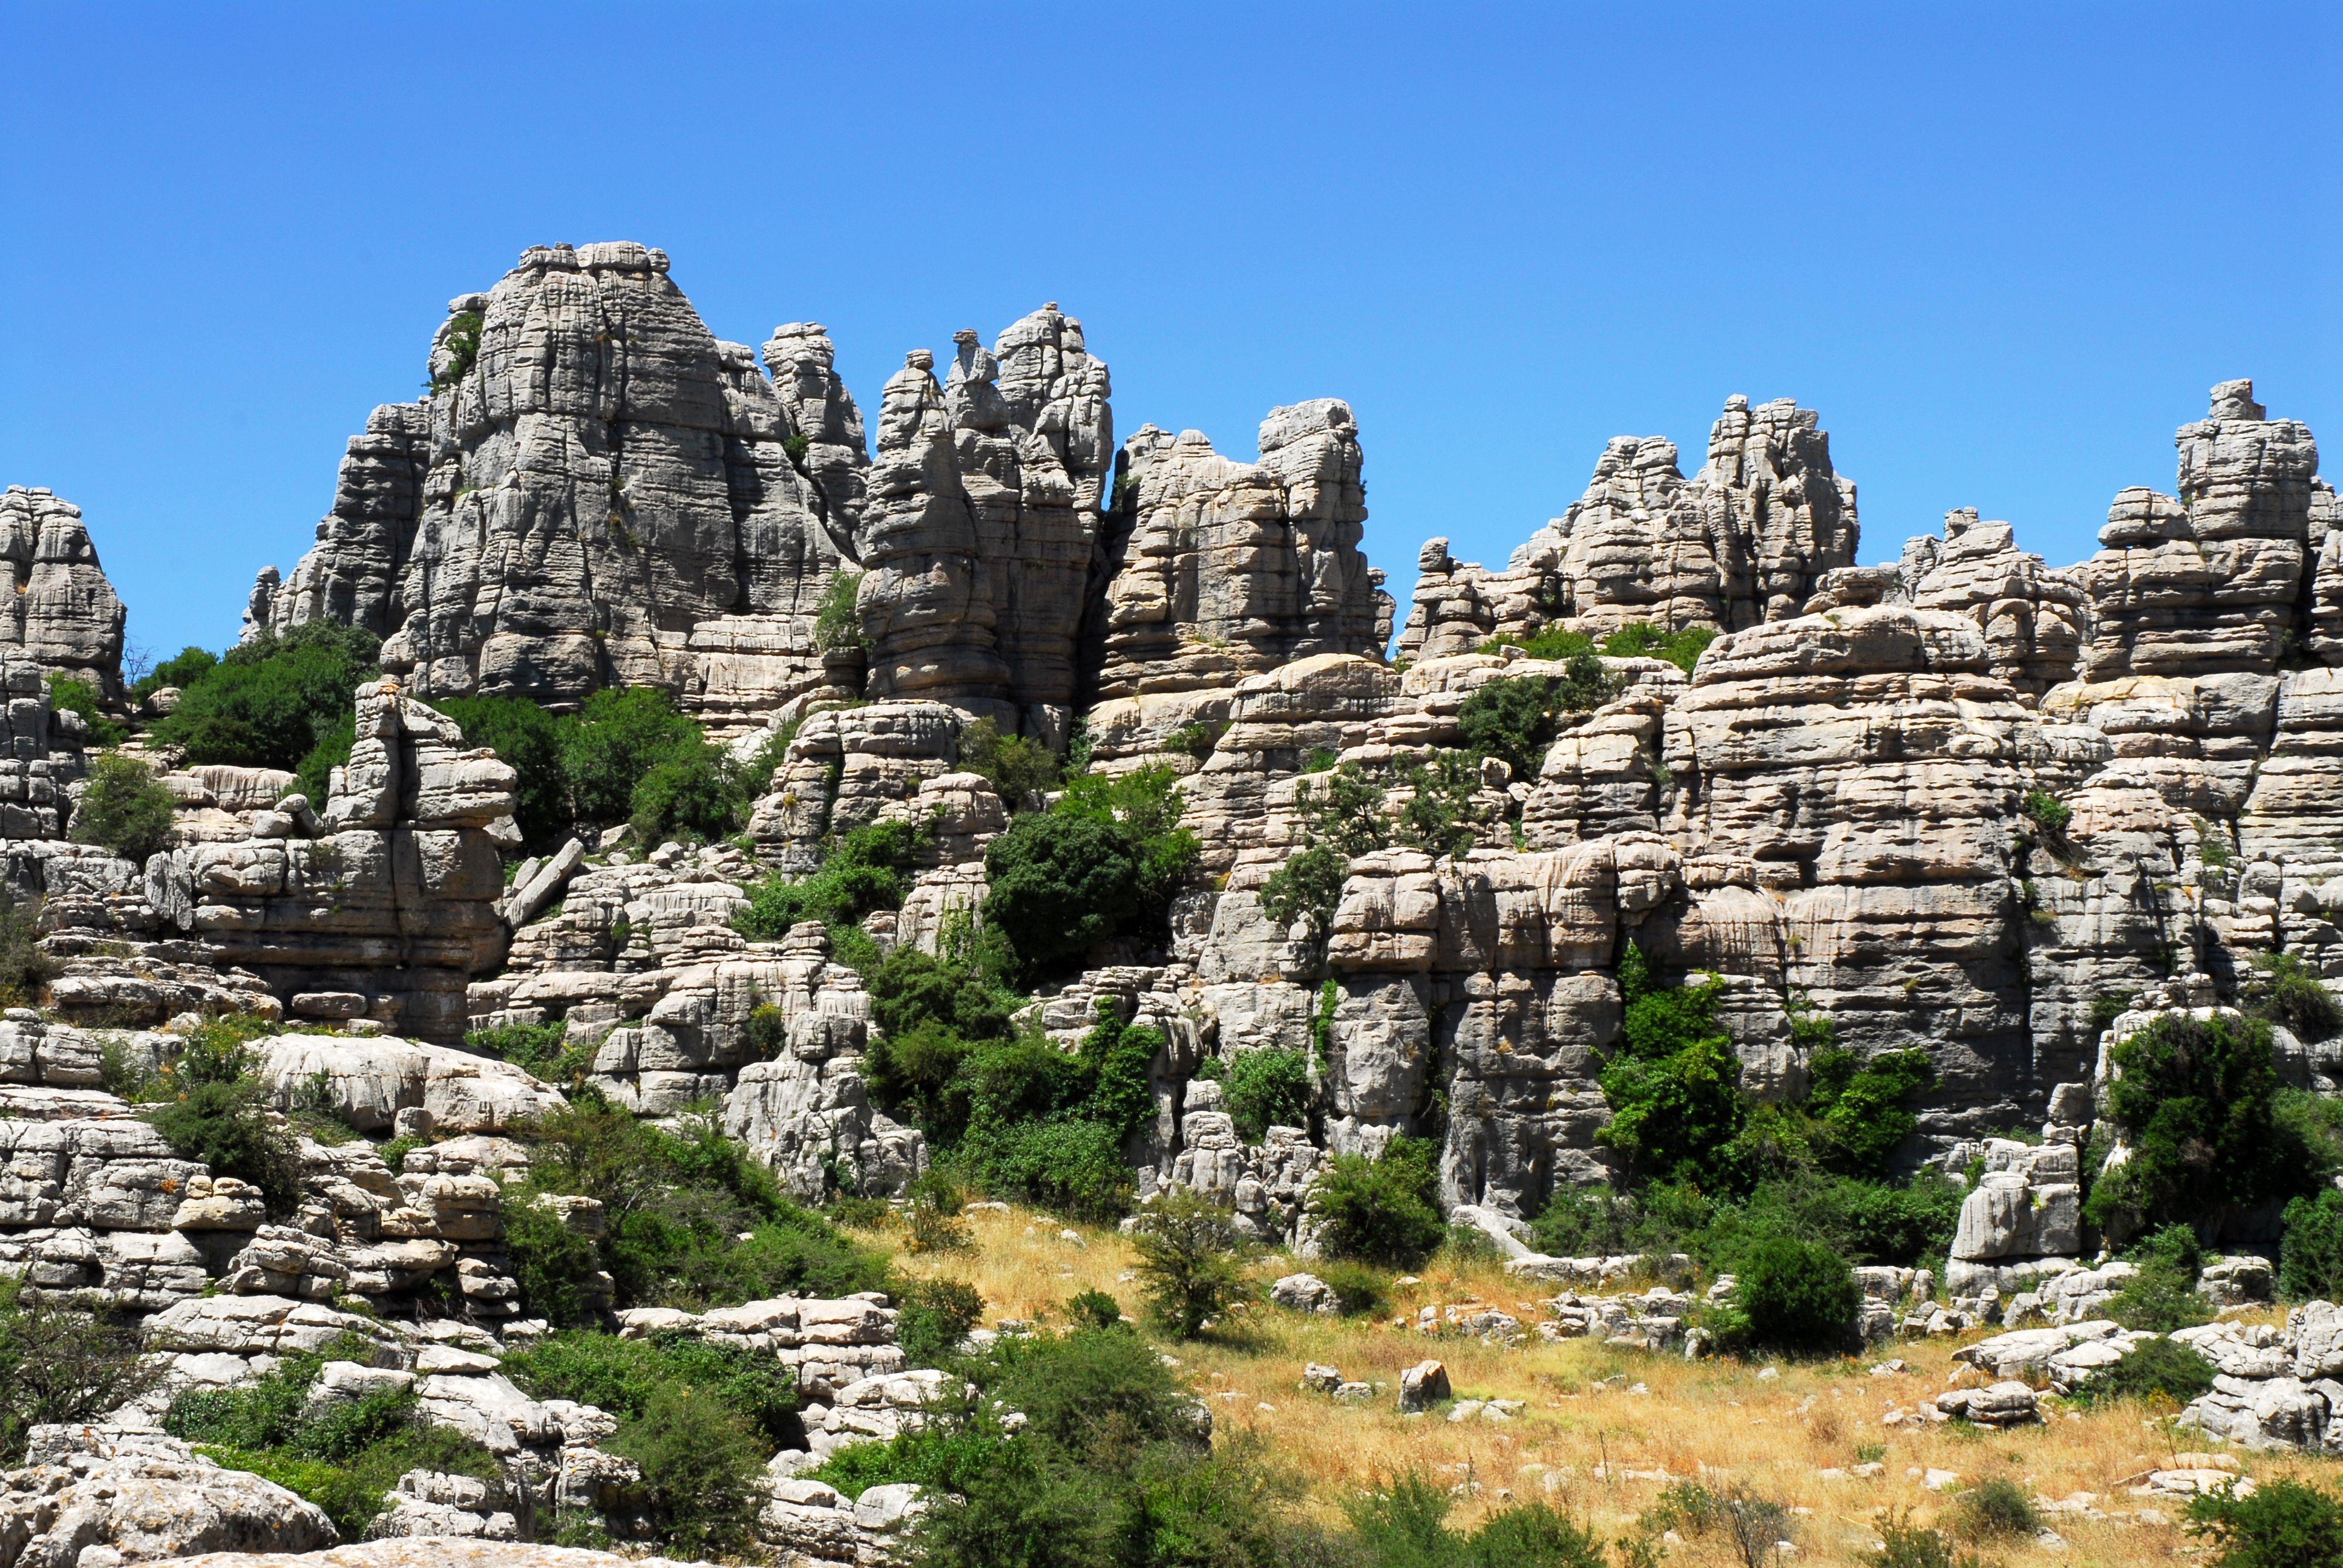 Guided visit in Torcal de Antequera and Dolmenes